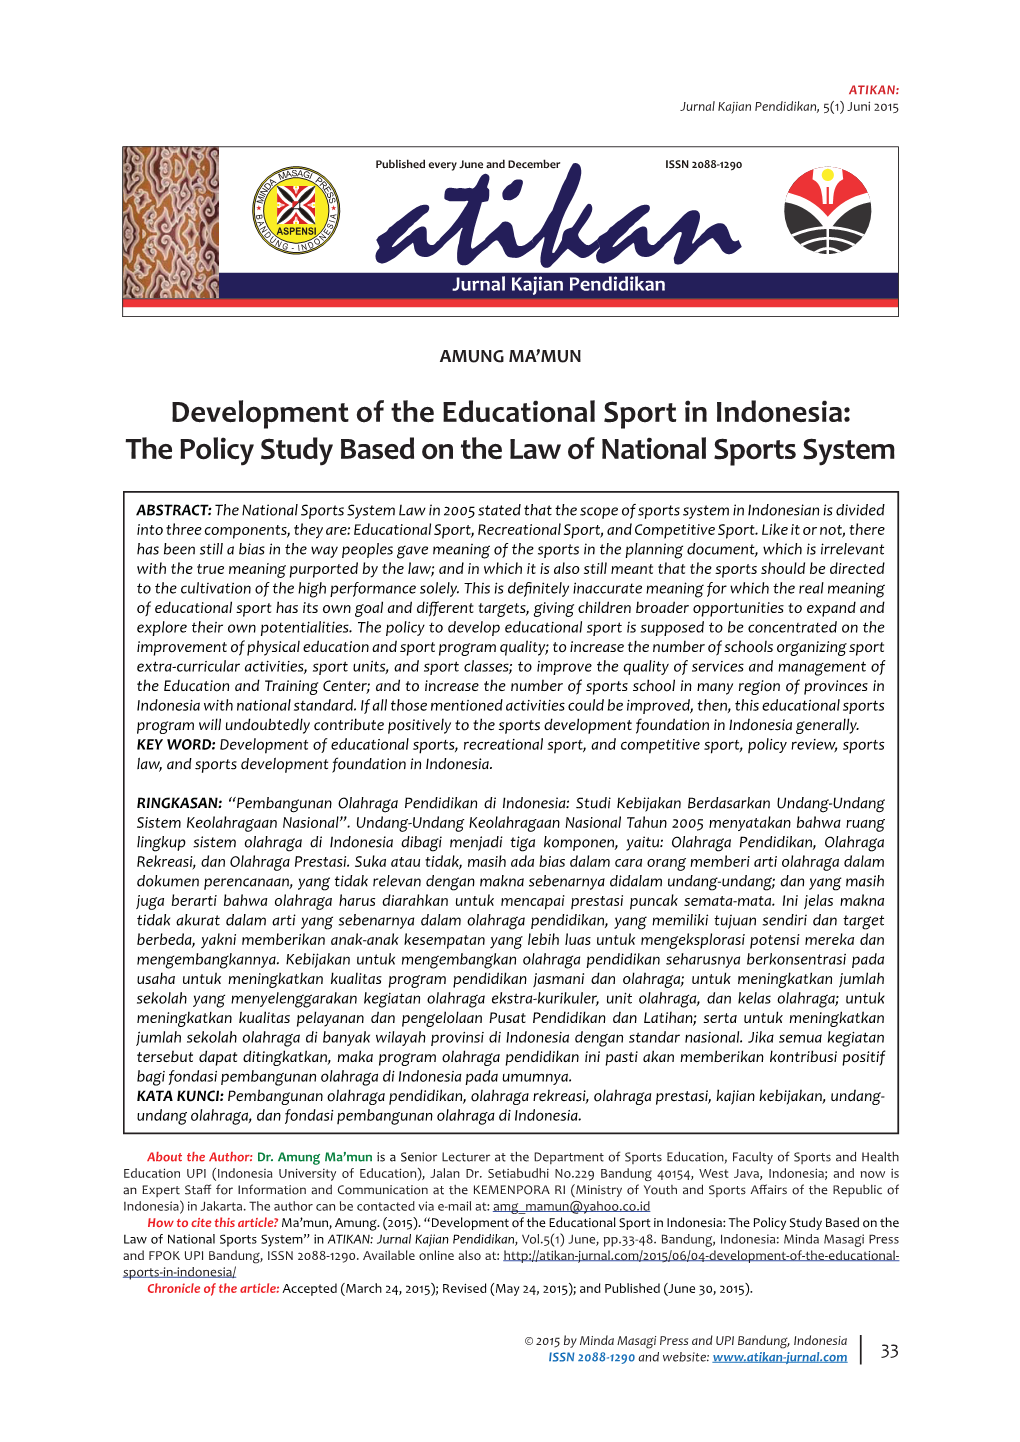 Development of the Educational Sport in Indonesia: the Policy Study Based on the Law of National Sports System